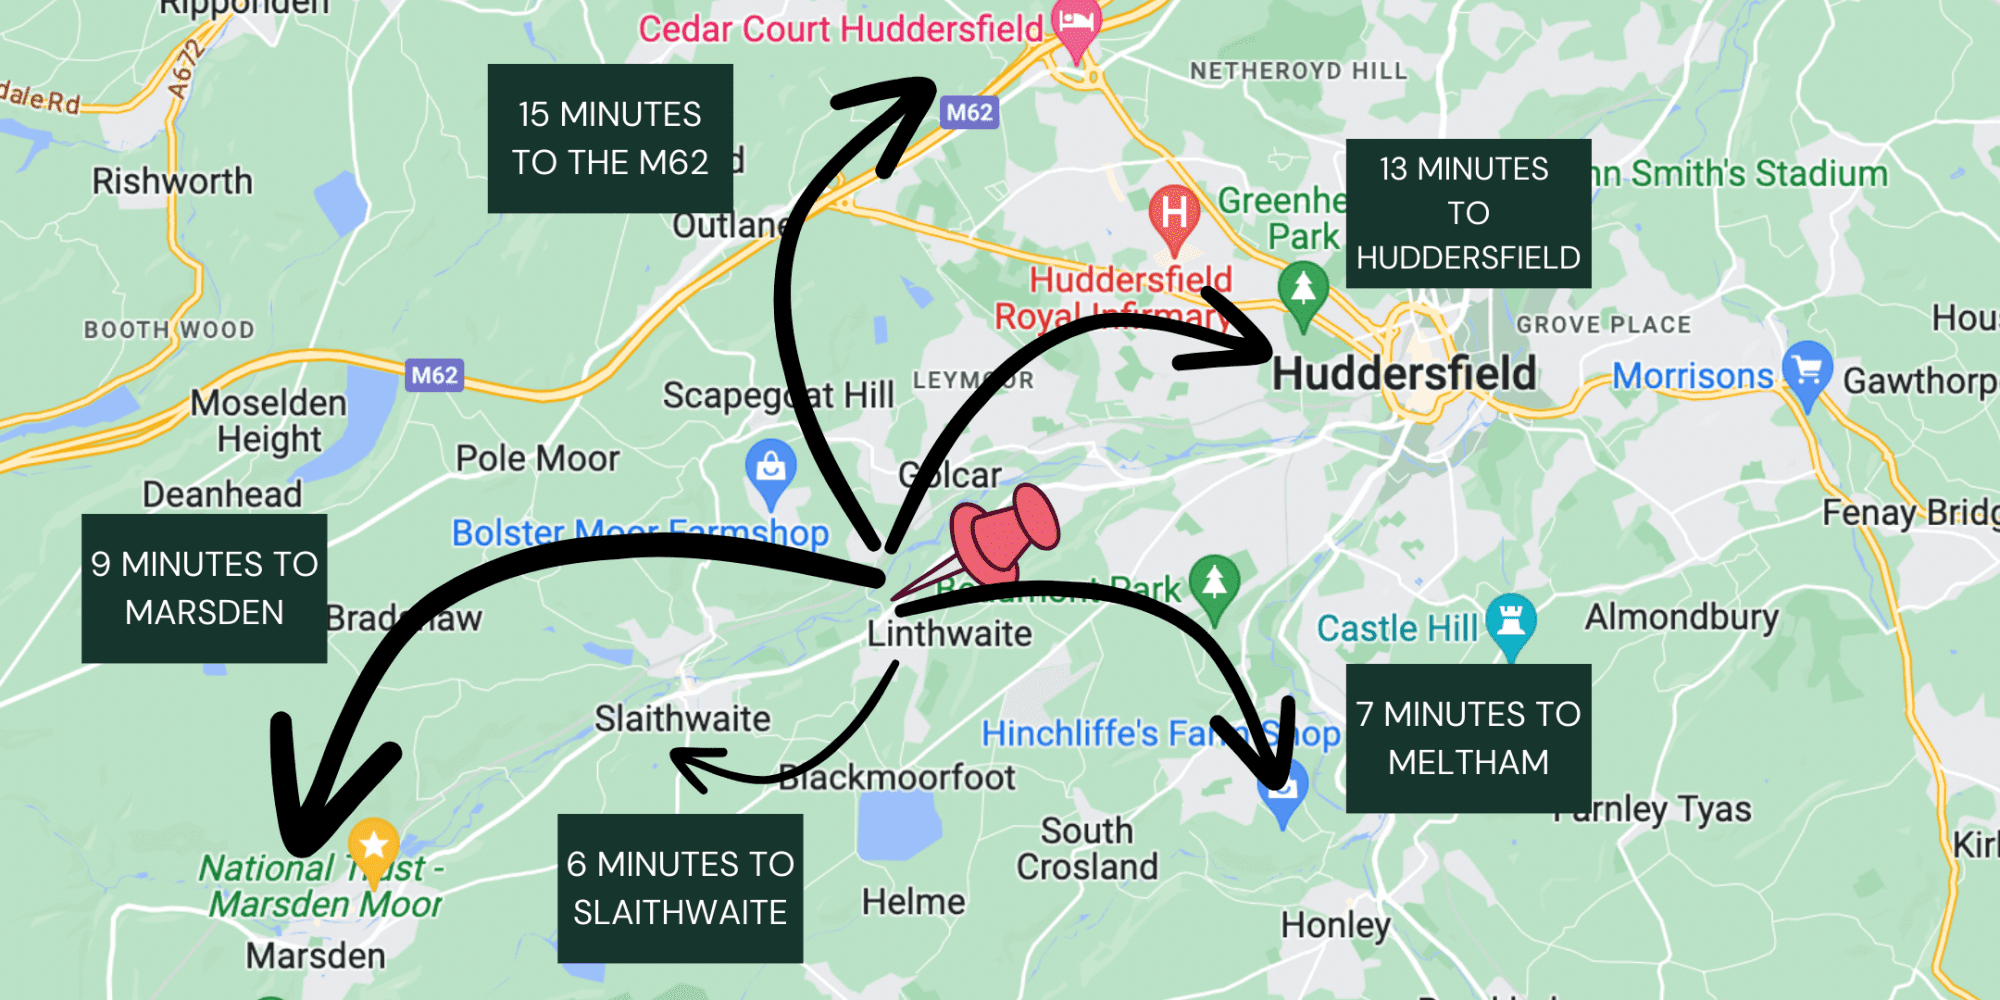 Linthwaite - directions to places in Huddersfield